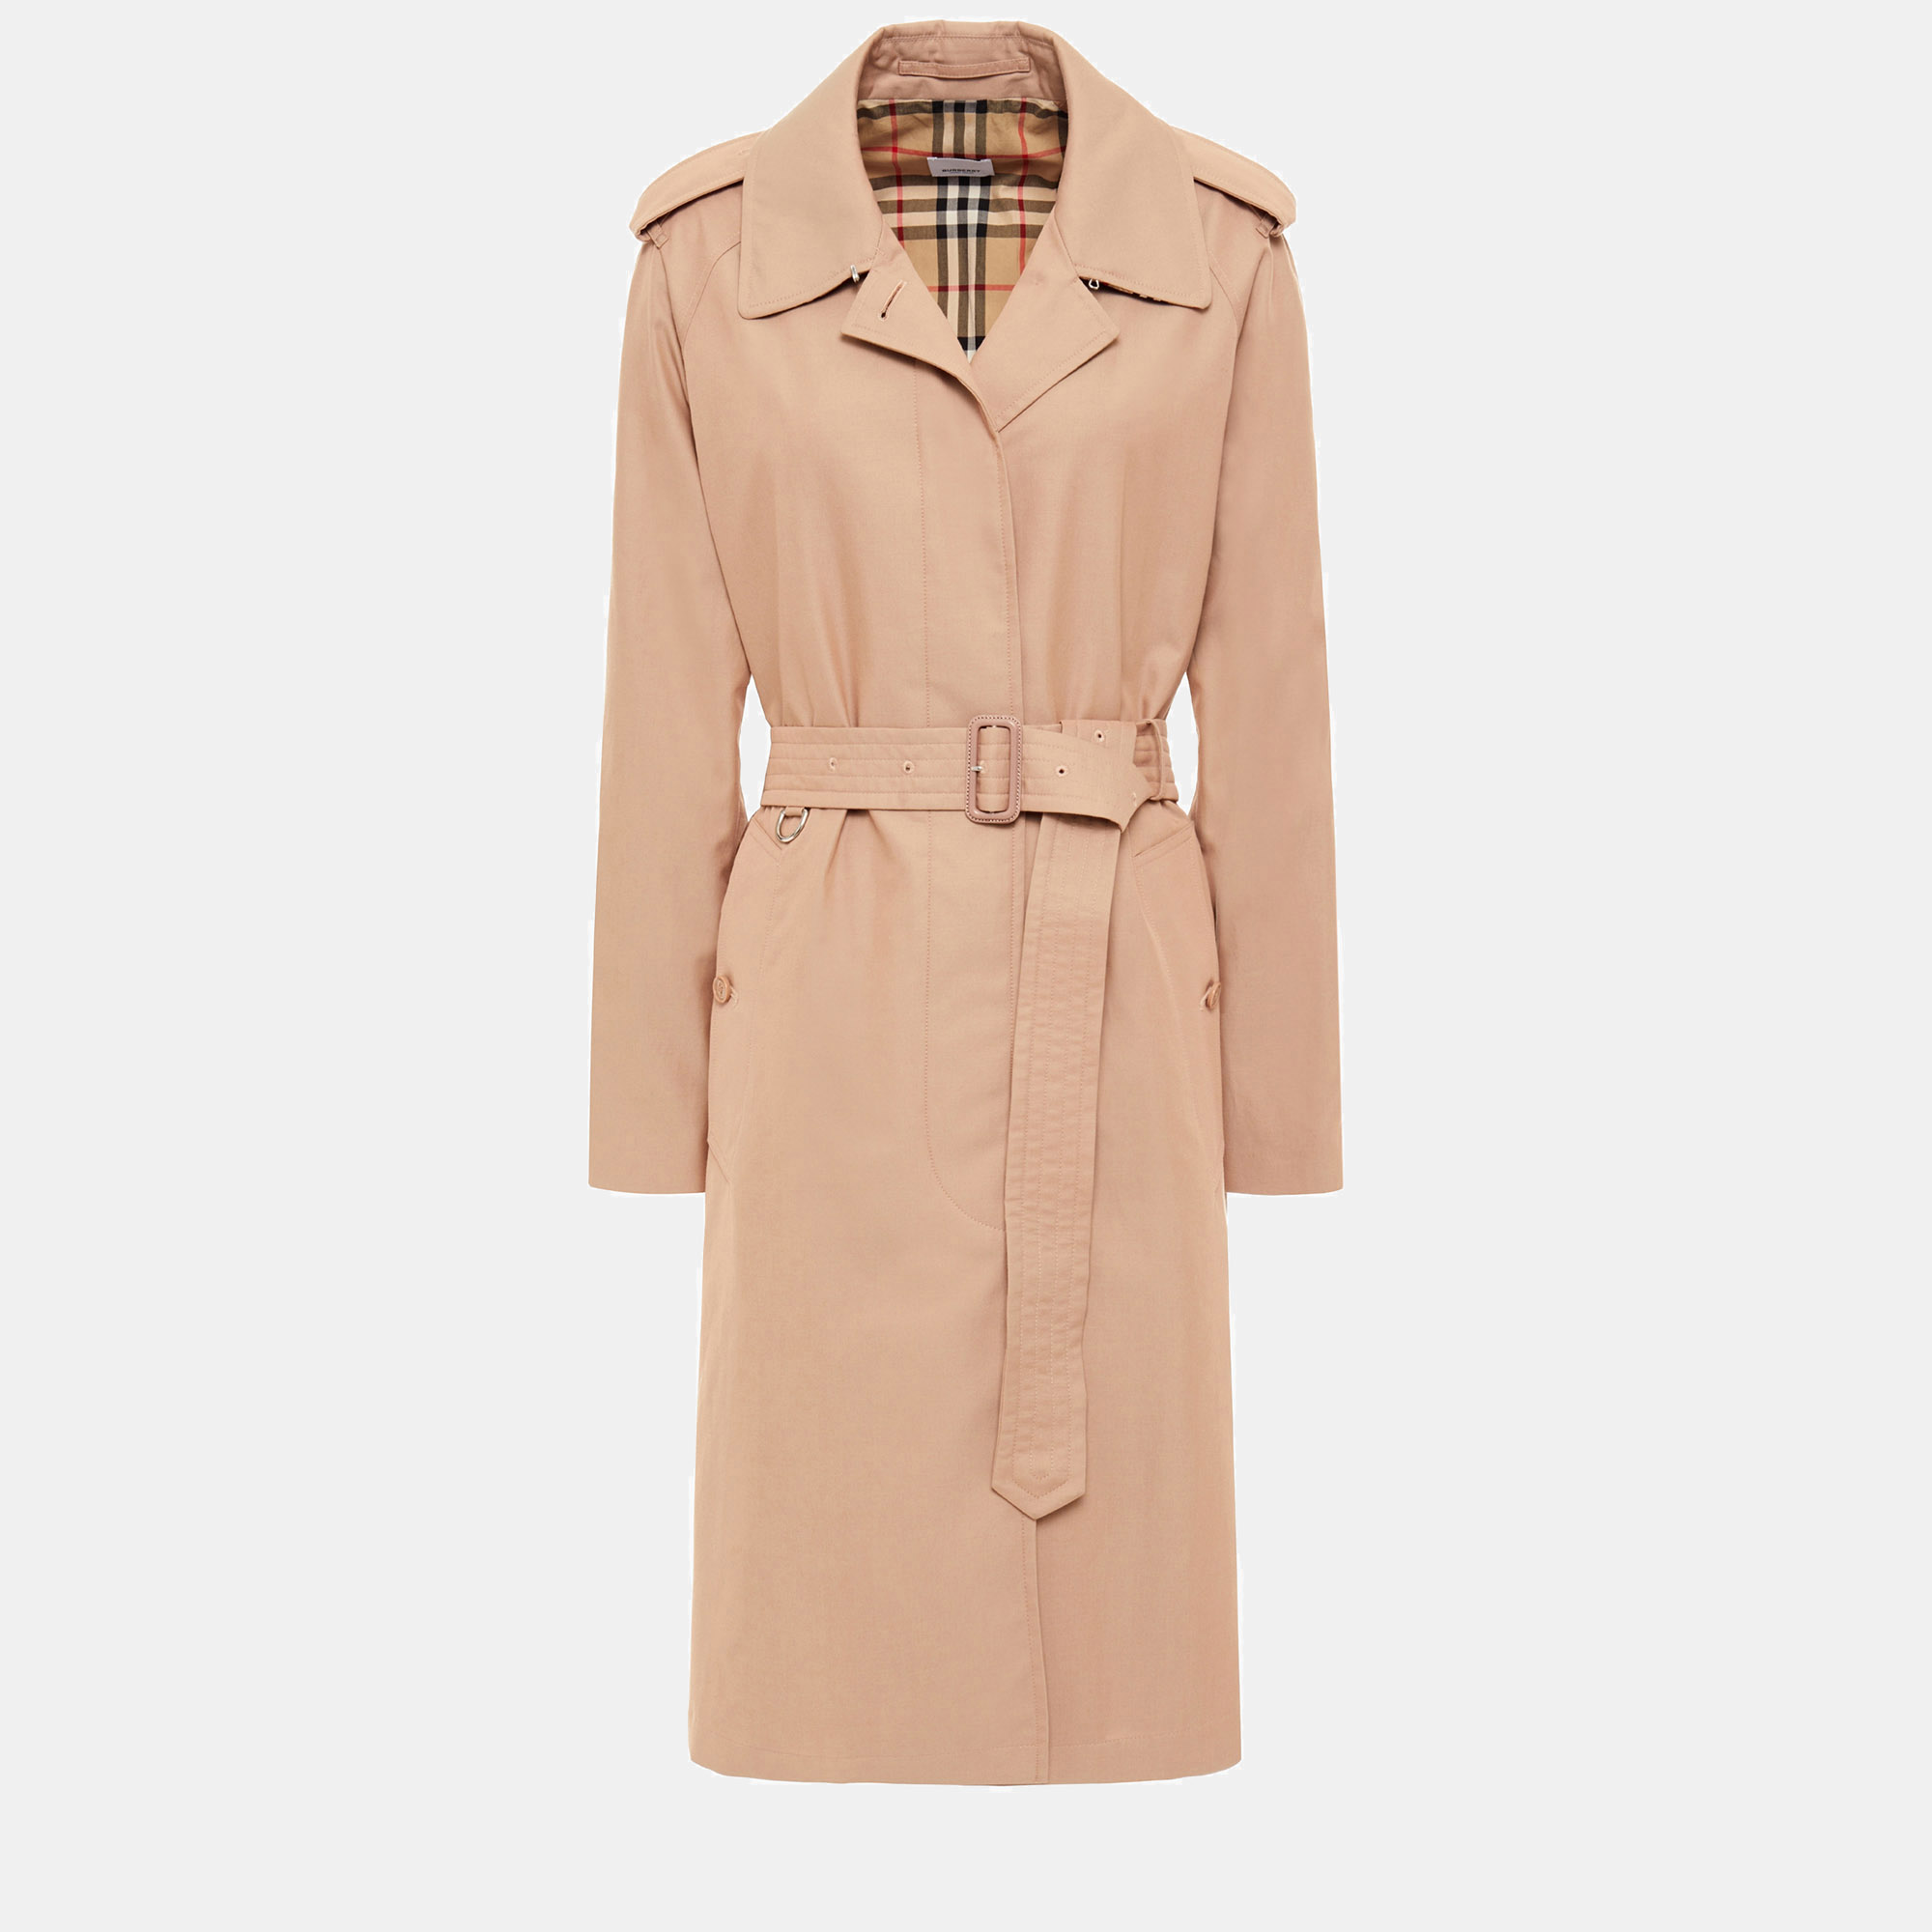 Burberry cotton trench coat 8